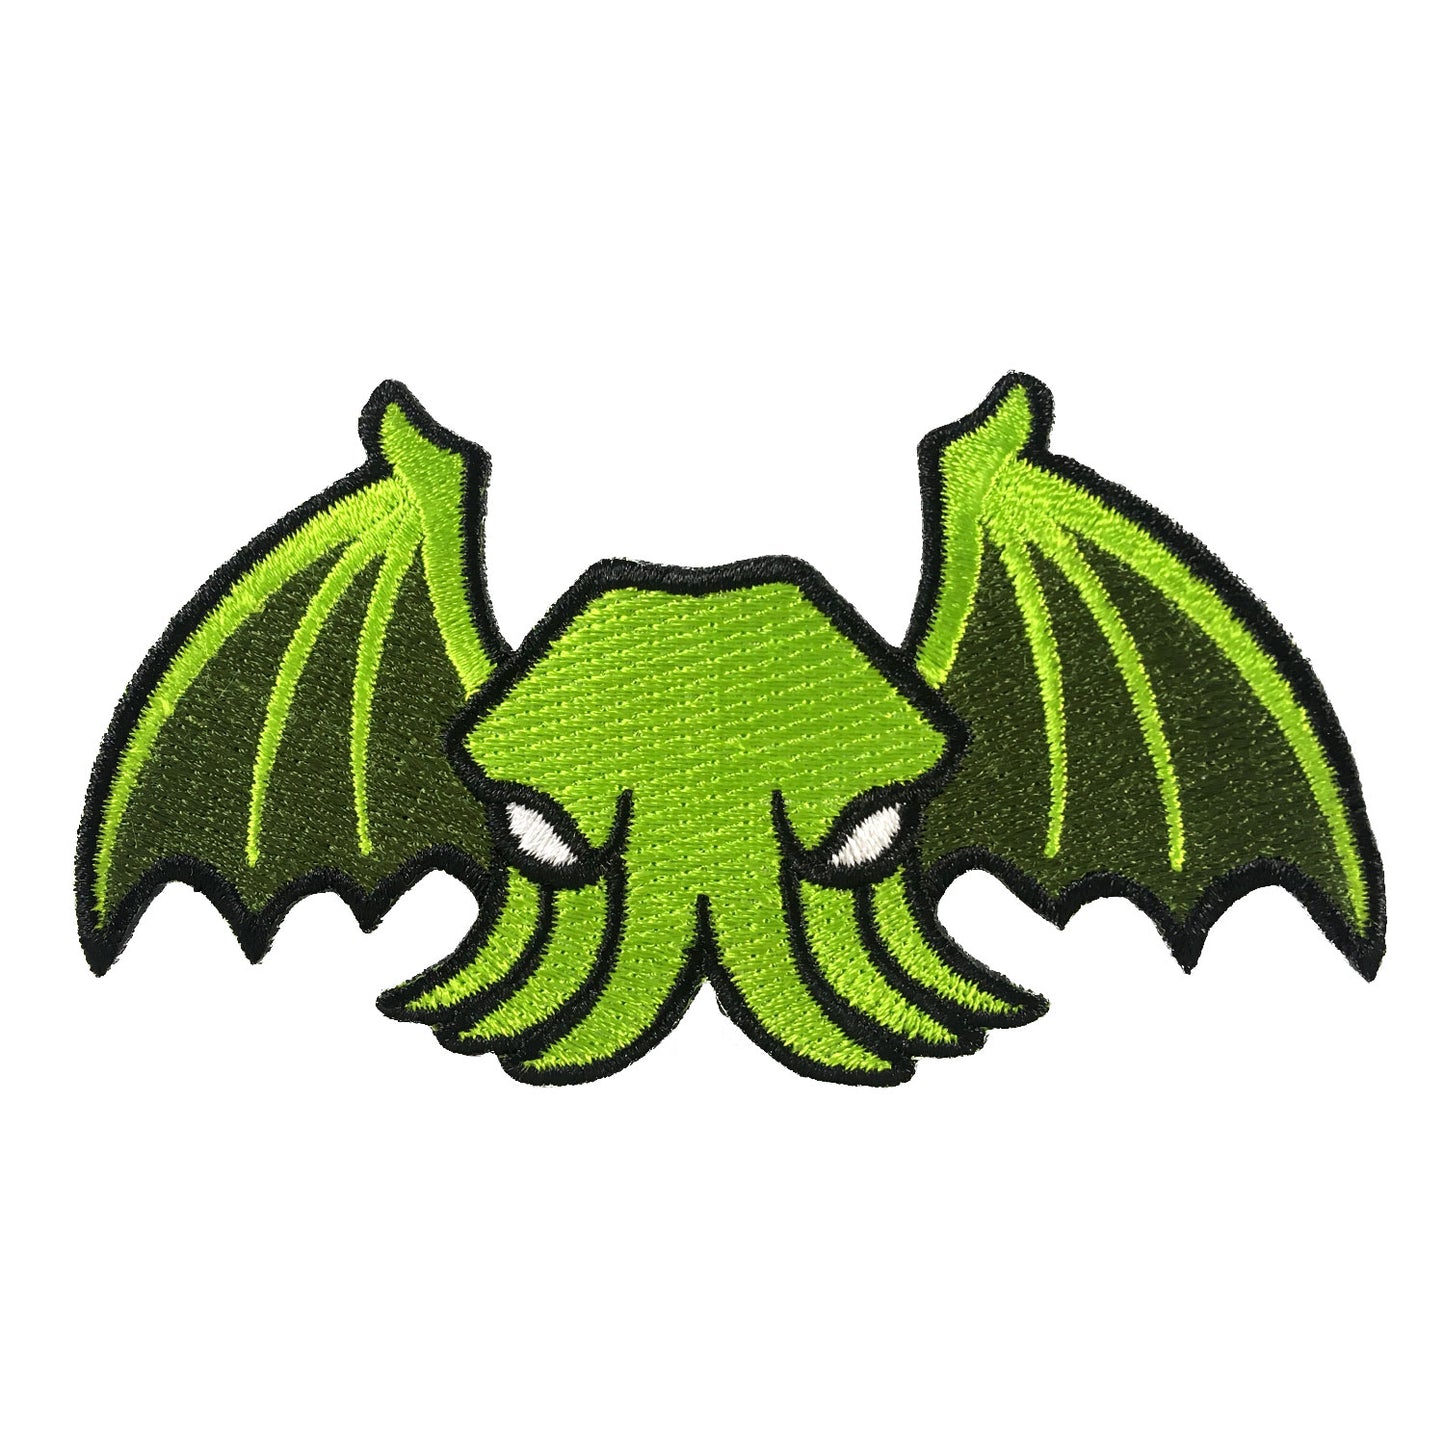 Winged Cthulhu embroidered patch by Monsterologist